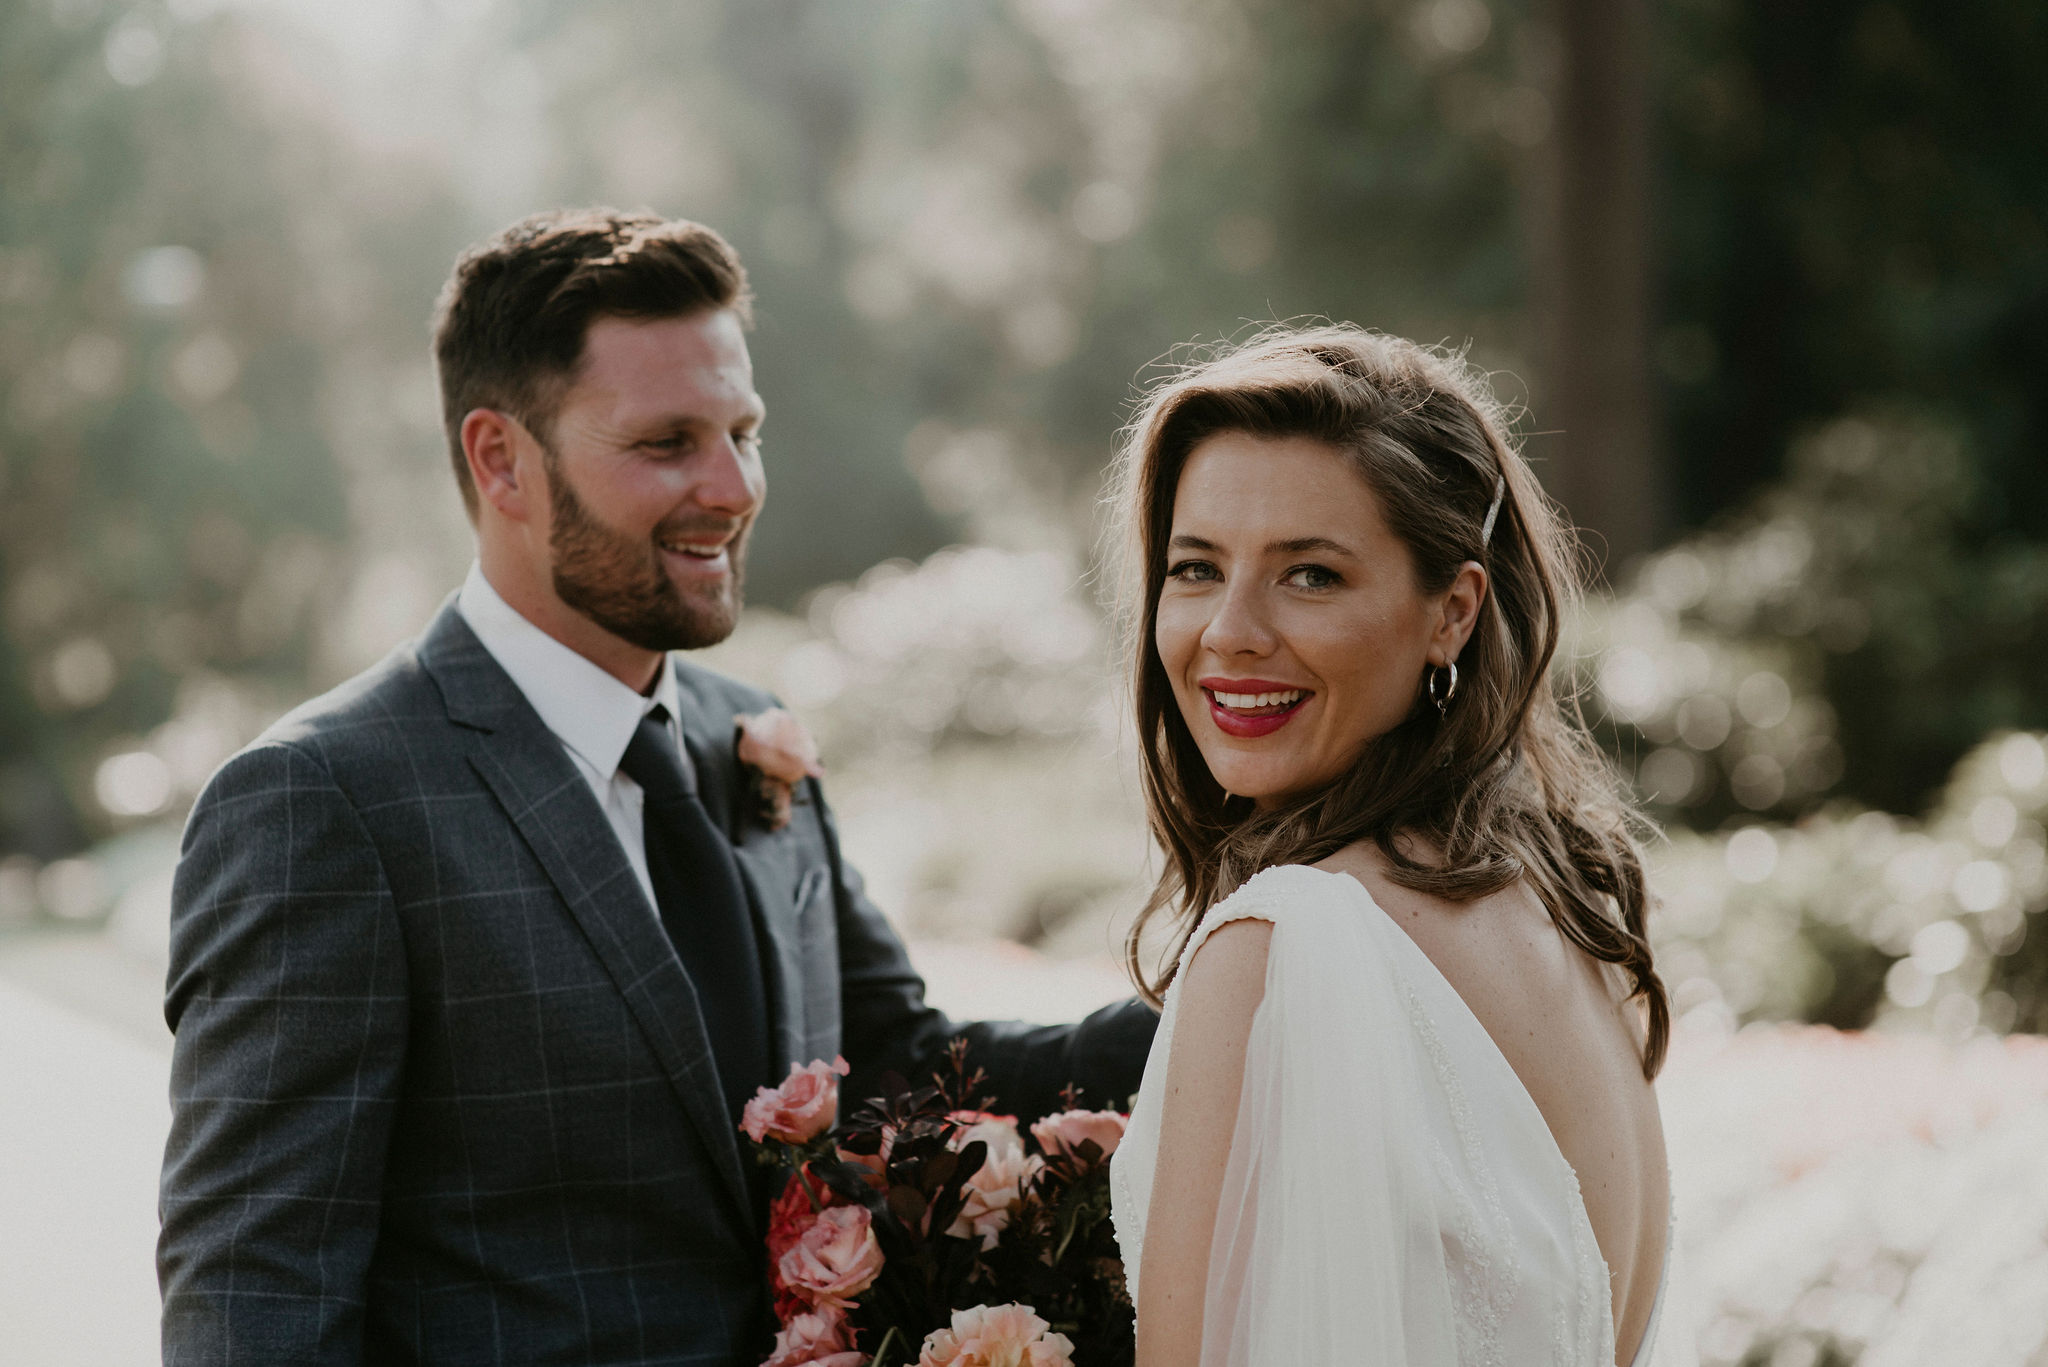 Bride looks back at the camera smiling while groom looks lovingly at her sun drenched in the Fitzroy Gardens Melbourne Elopement and Wedding Photography Sarah Matler Photographer